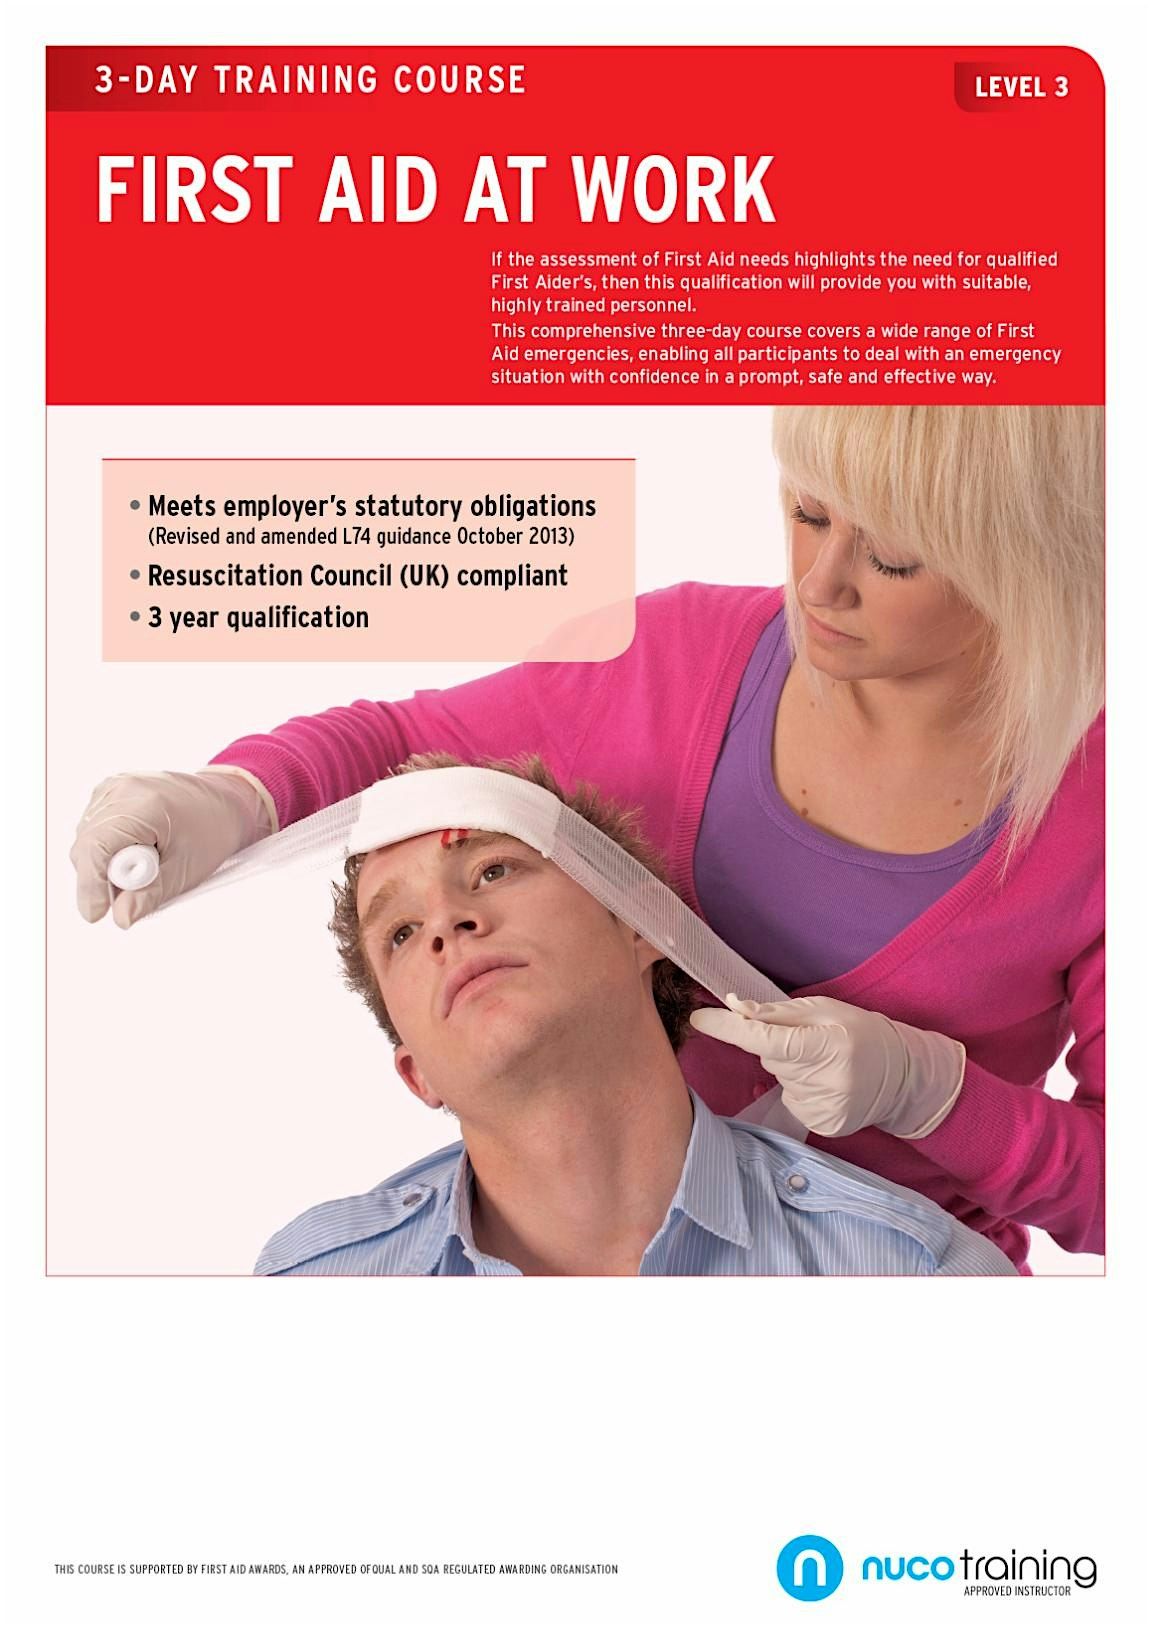 Level 3 First Aid at Work Course